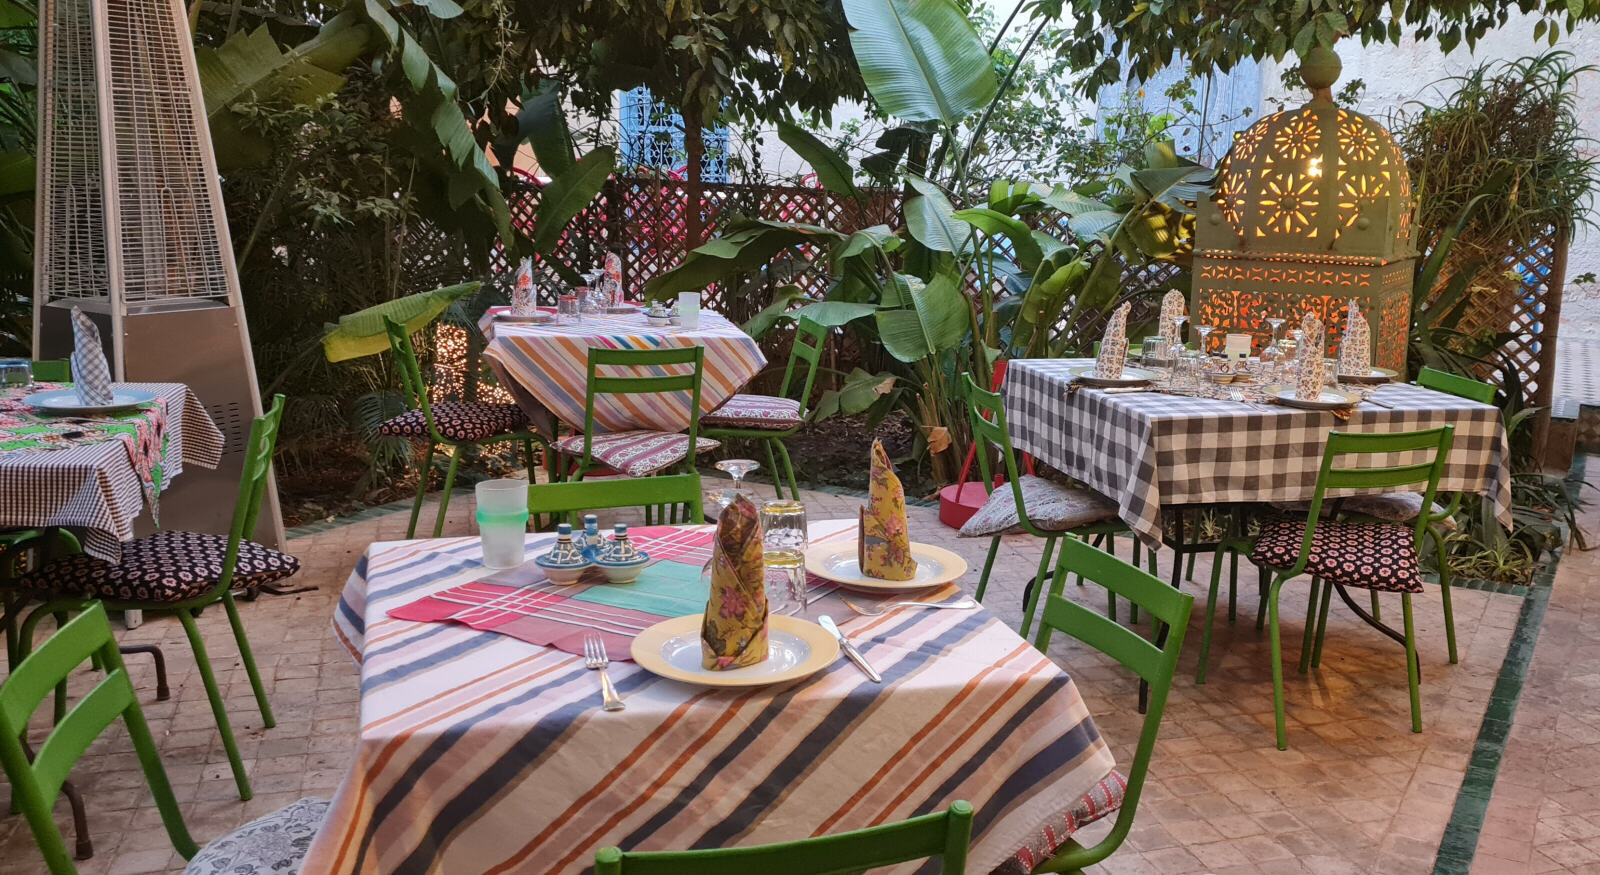 The garden at Fez Cafe in Fez, Morocco